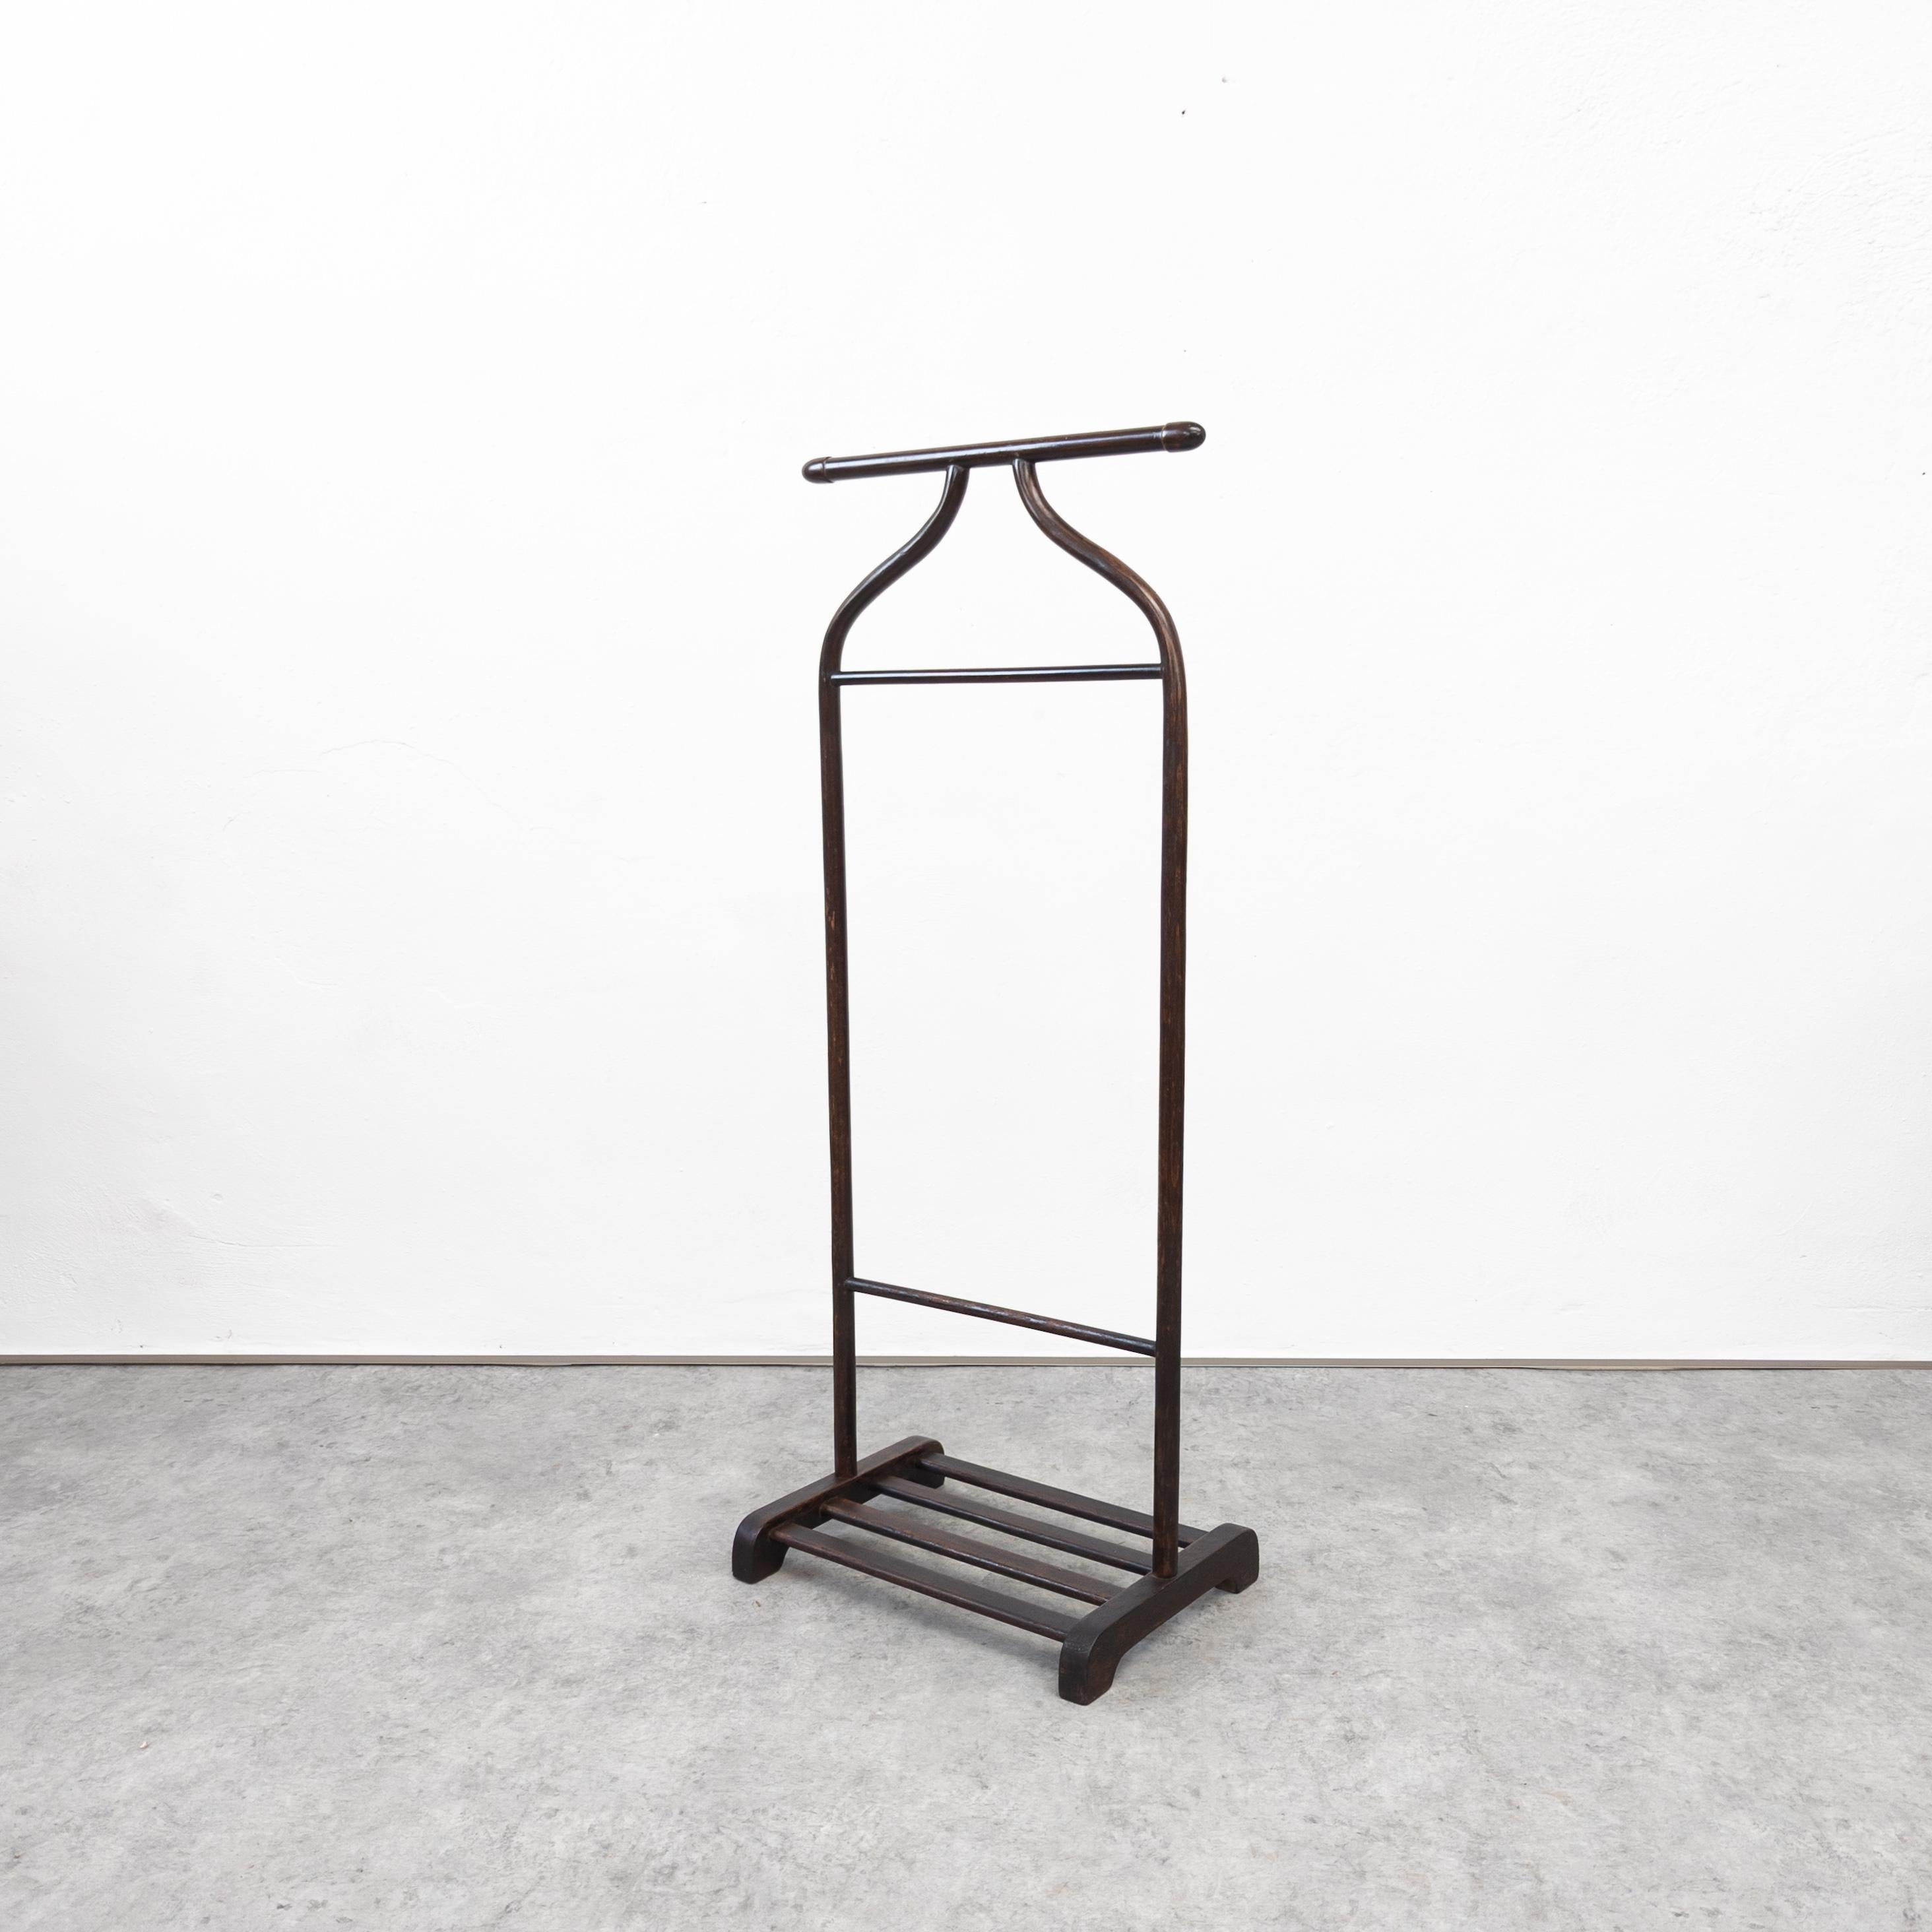 Rare and beautiful beechwood valet manufactured by Thonet during 1920's and 1930's. Catalogue number P133. This piece is in very good original condition, structurally sound. Labeled by manufacturers trade mark. Dimensions: 45 x 25 x 108 cm.